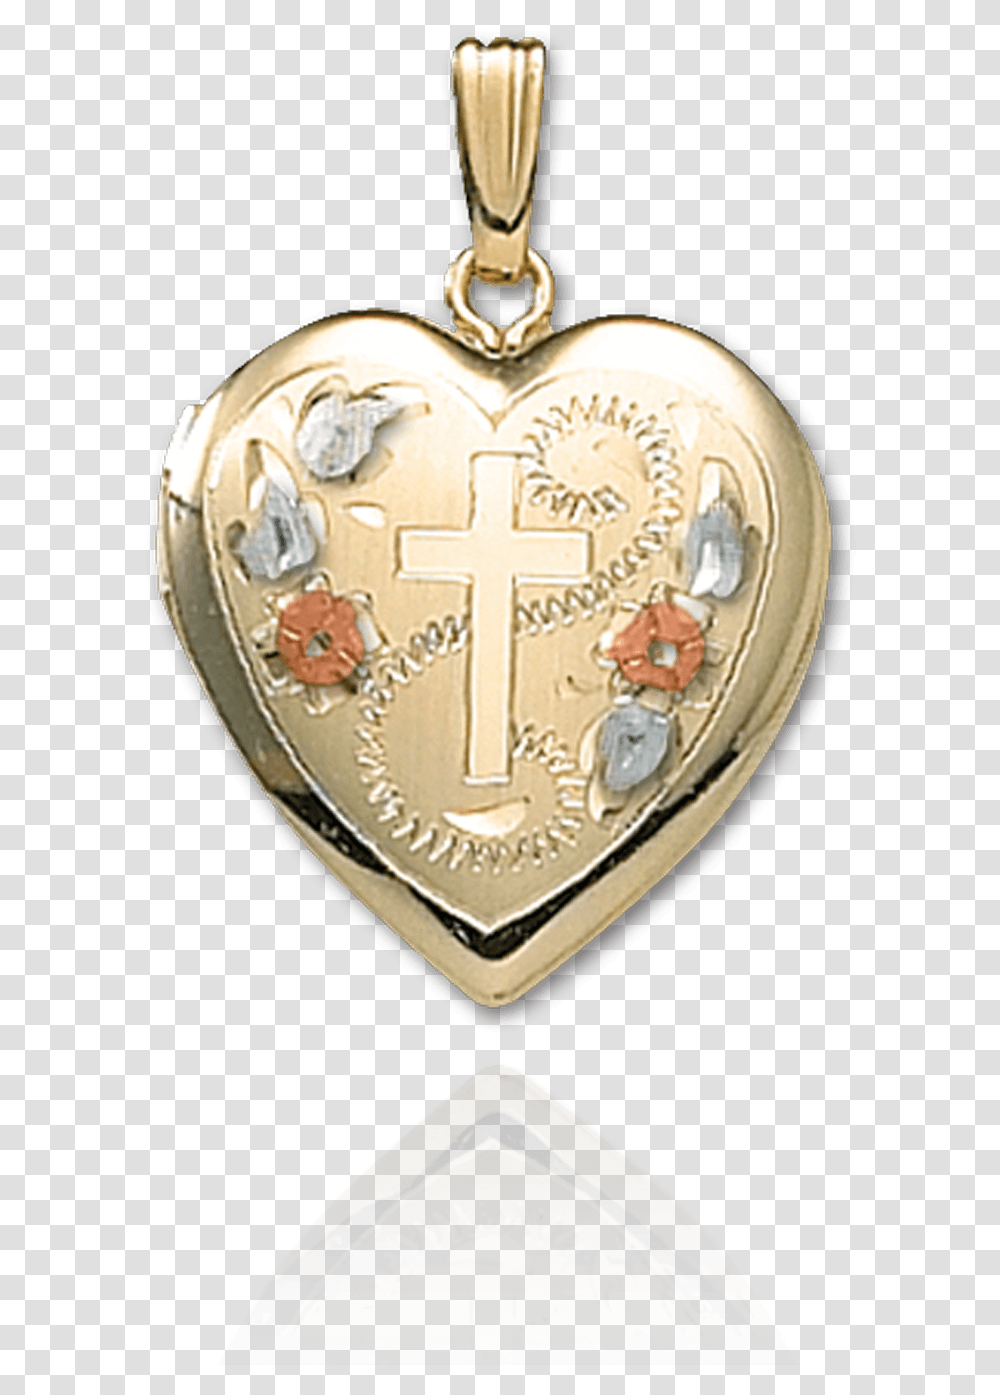 Heart Locket Engraved With Cross And Flower Design Locket, Pendant, Jewelry, Accessories, Accessory Transparent Png